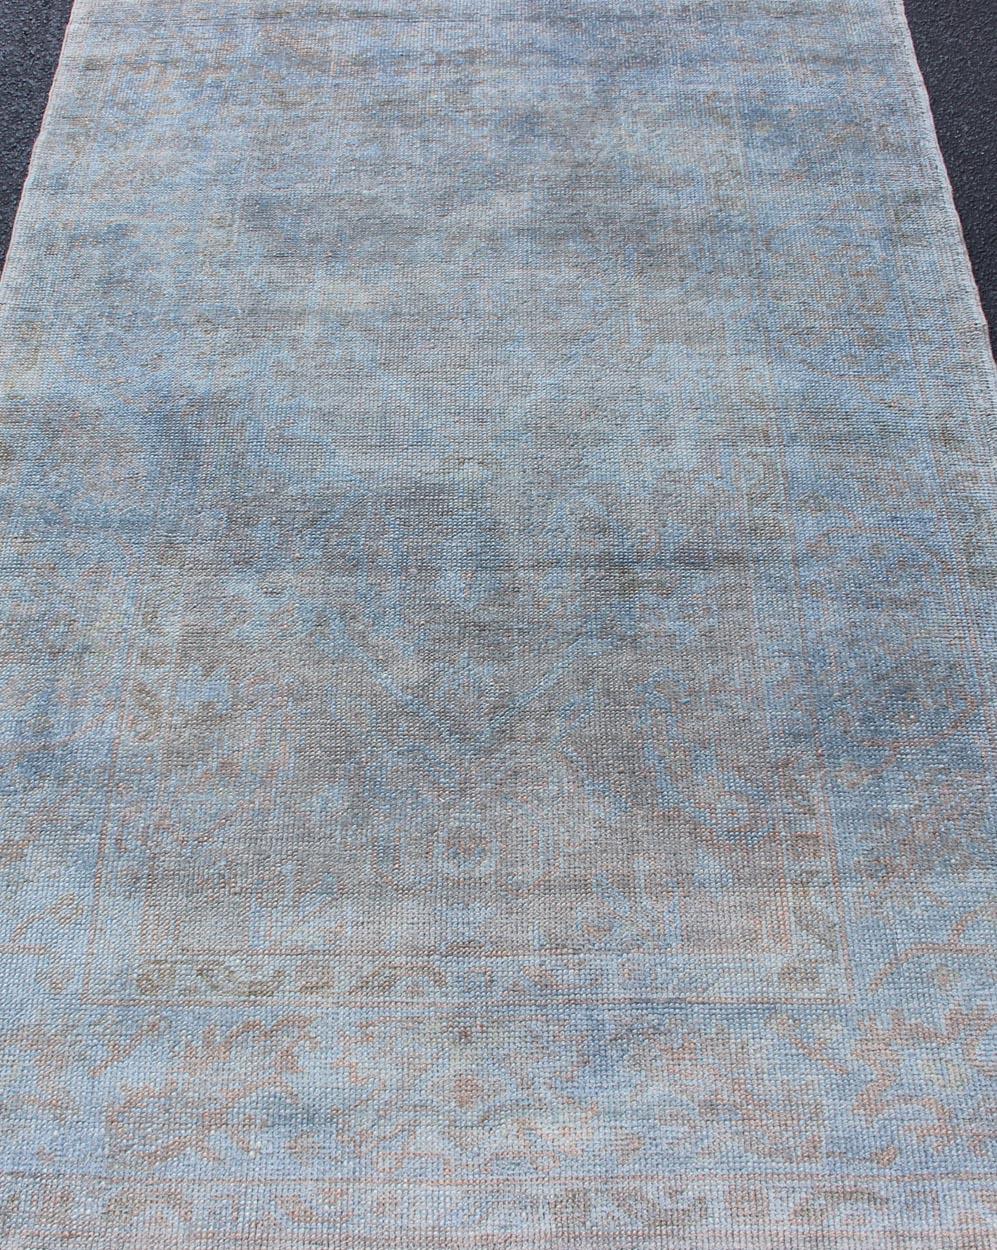 Wool Vintage Turkish Over-Dyed Rug with Blue with Faded Brown For Sale